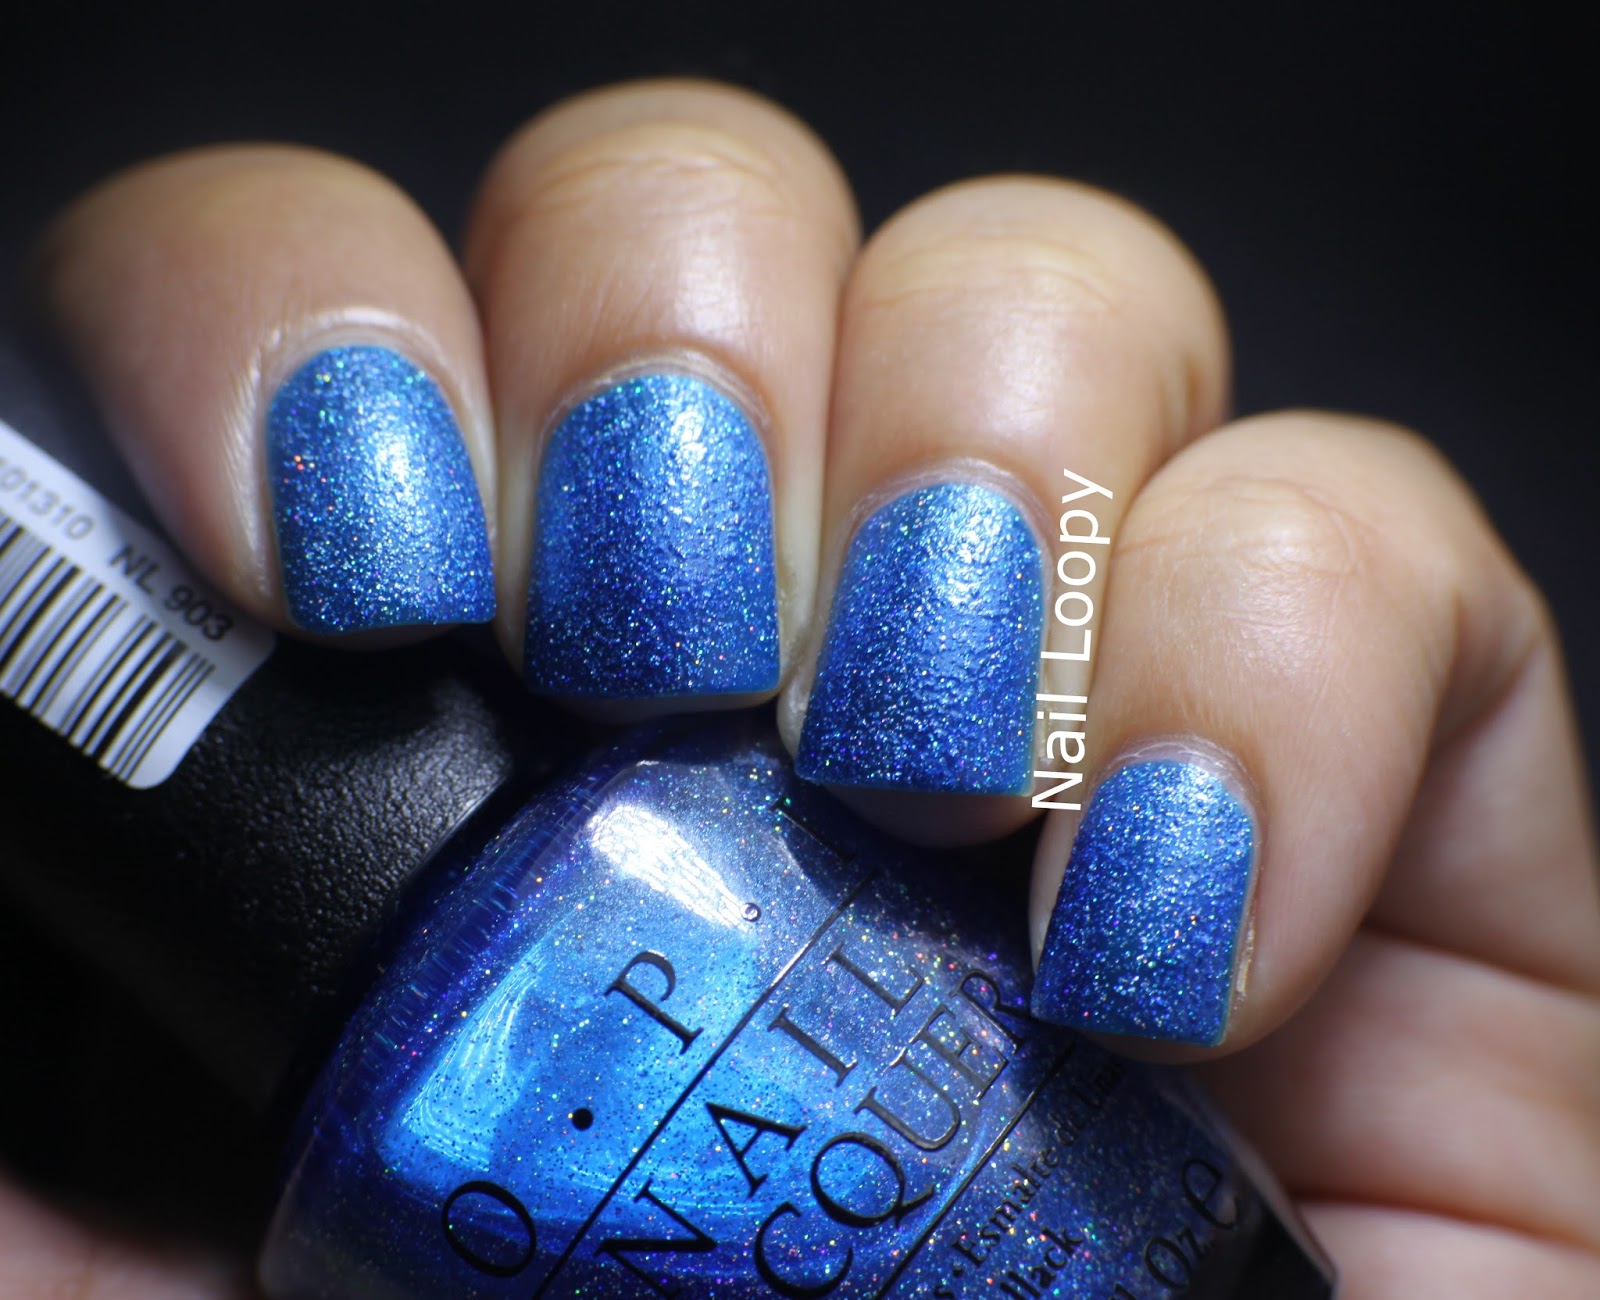 OPI Nail Polish in "Blue Chips" - wide 3